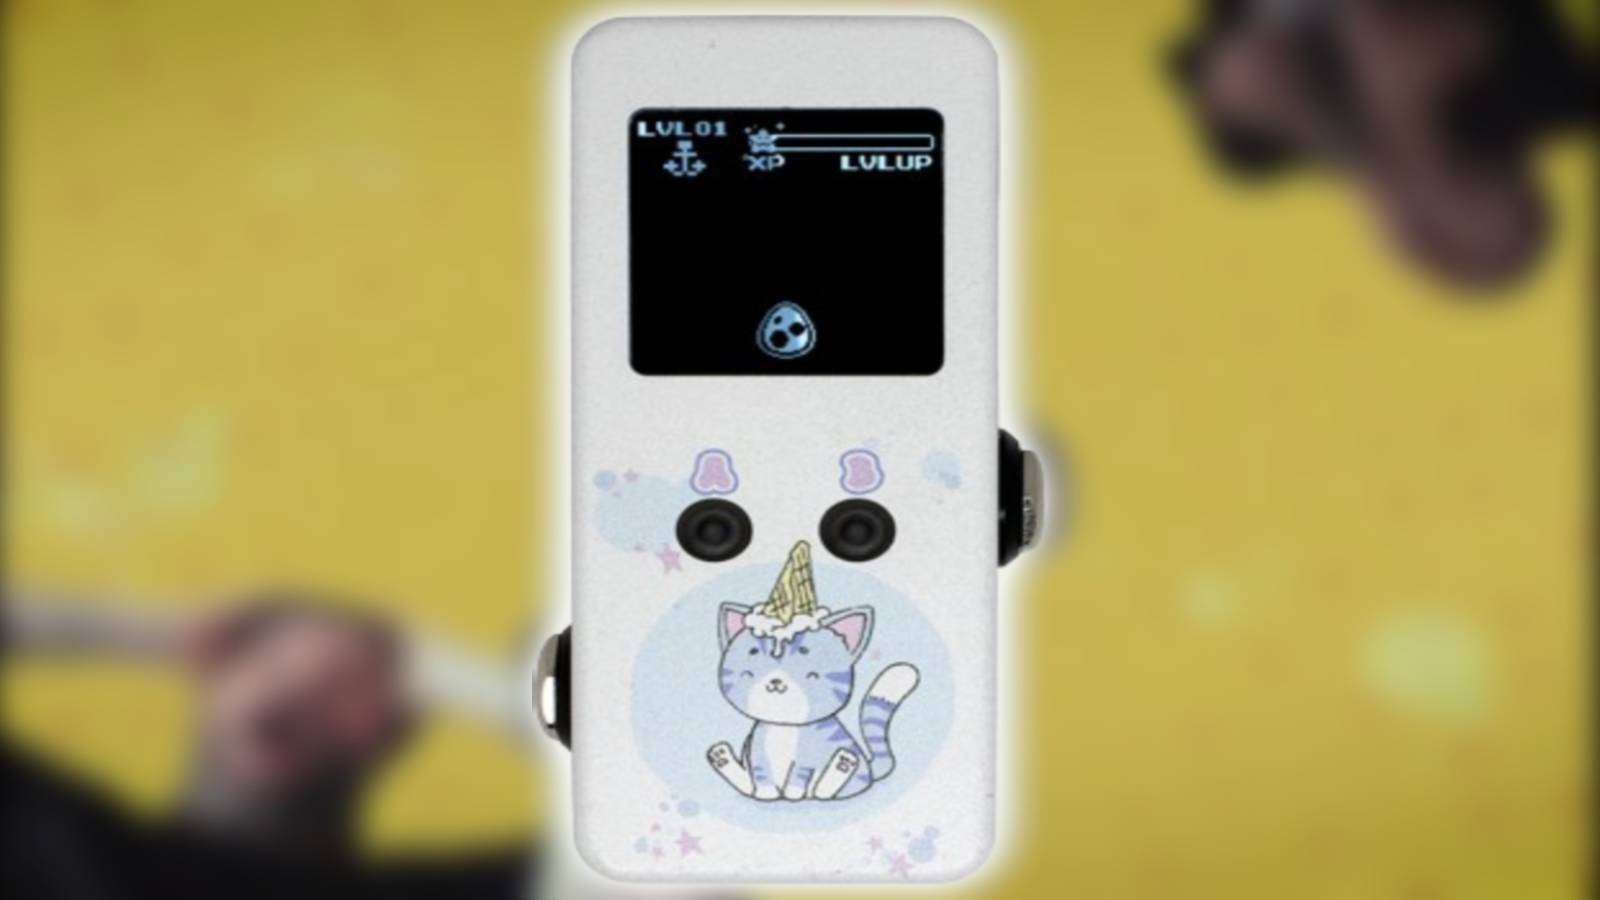 Image of the UWU VIRTUAL PET BUFFER by Ground Control Audio.